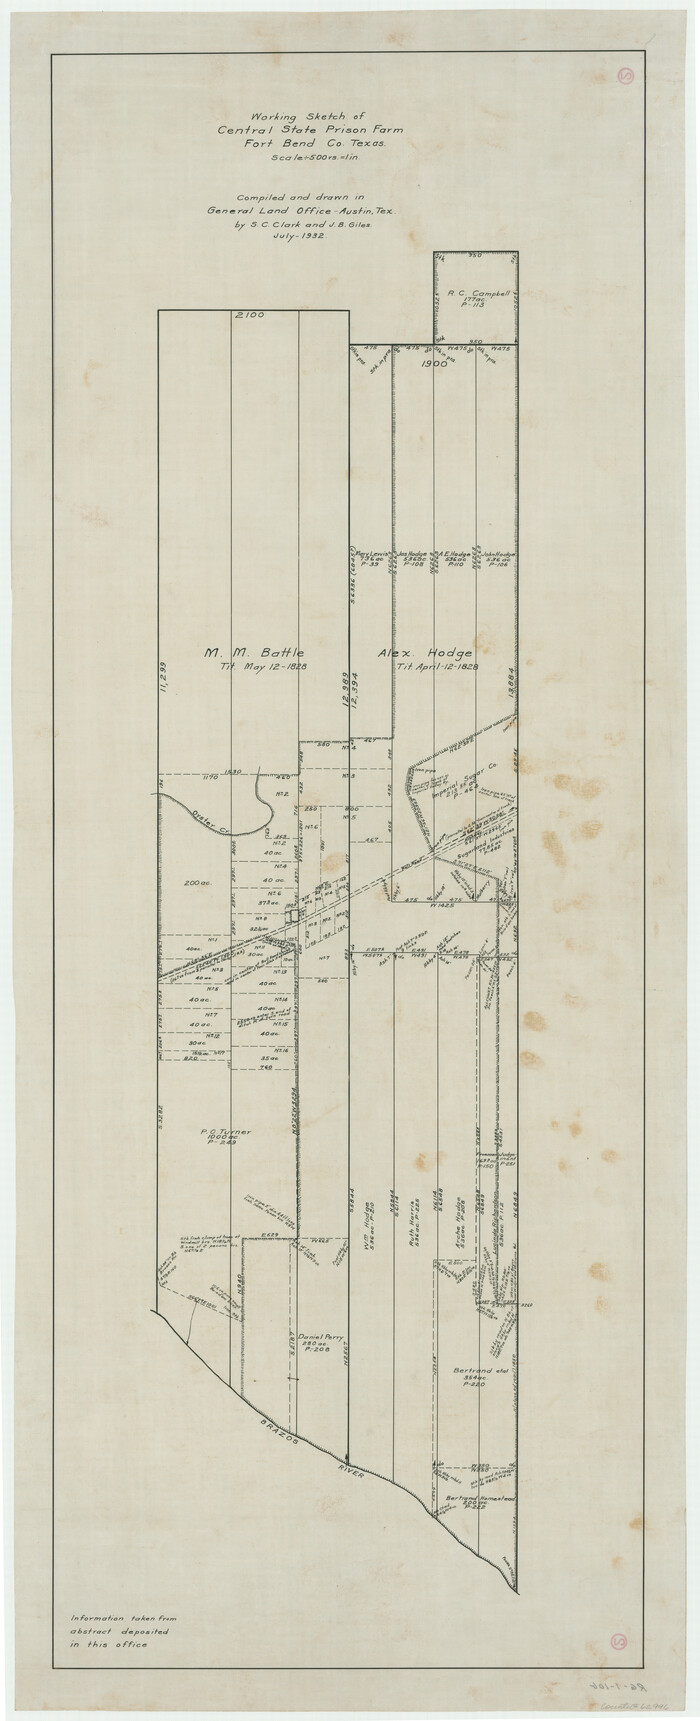 62996, Working Sketch of Central State Prison Farm, Fort Bend Co., Texas, General Map Collection